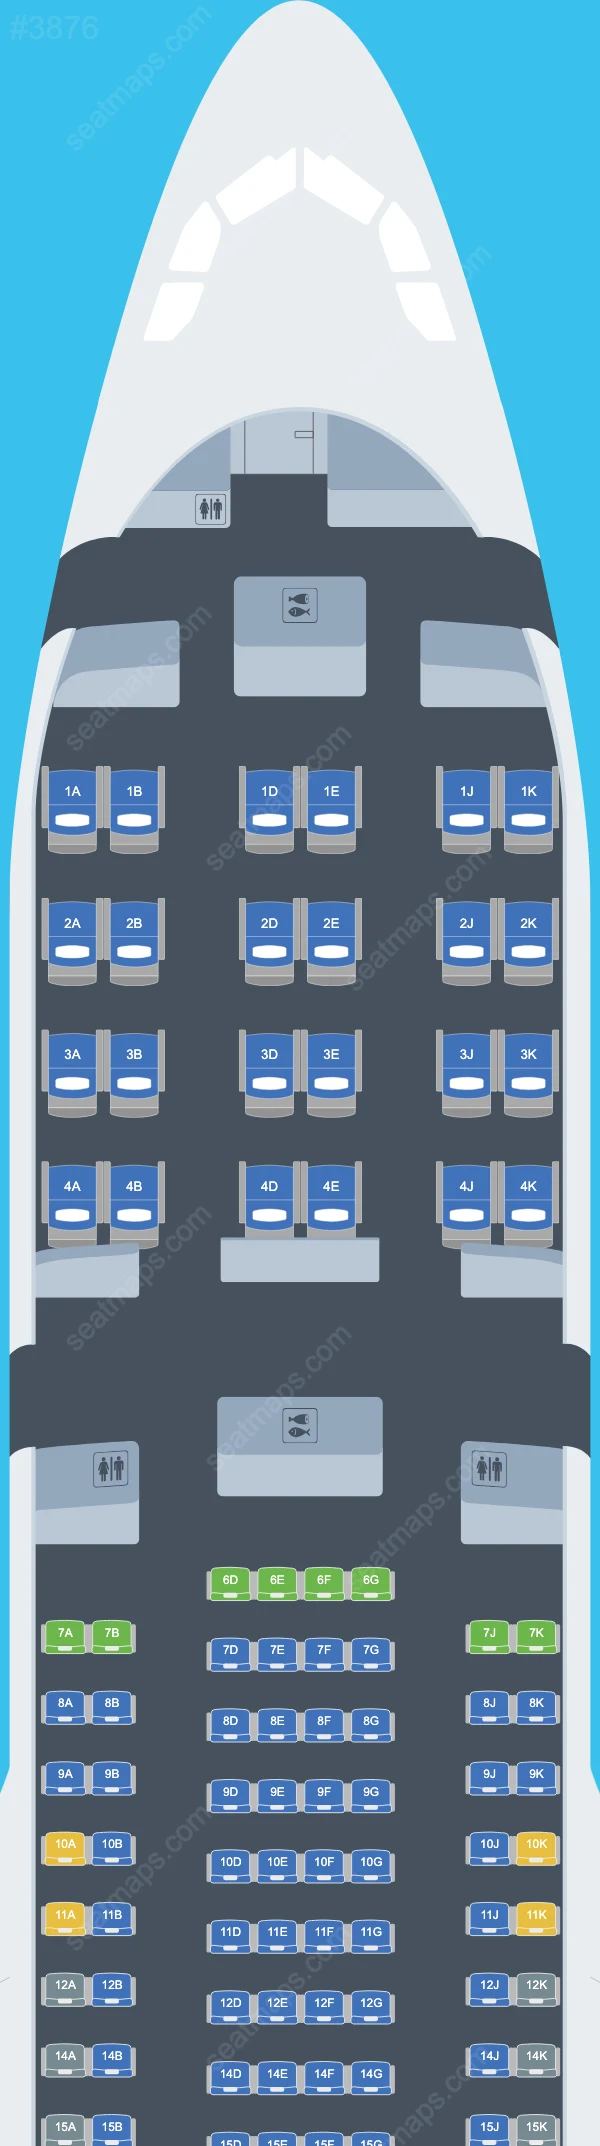 Fiji Airways Airbus A330-200 seatmap mobile preview